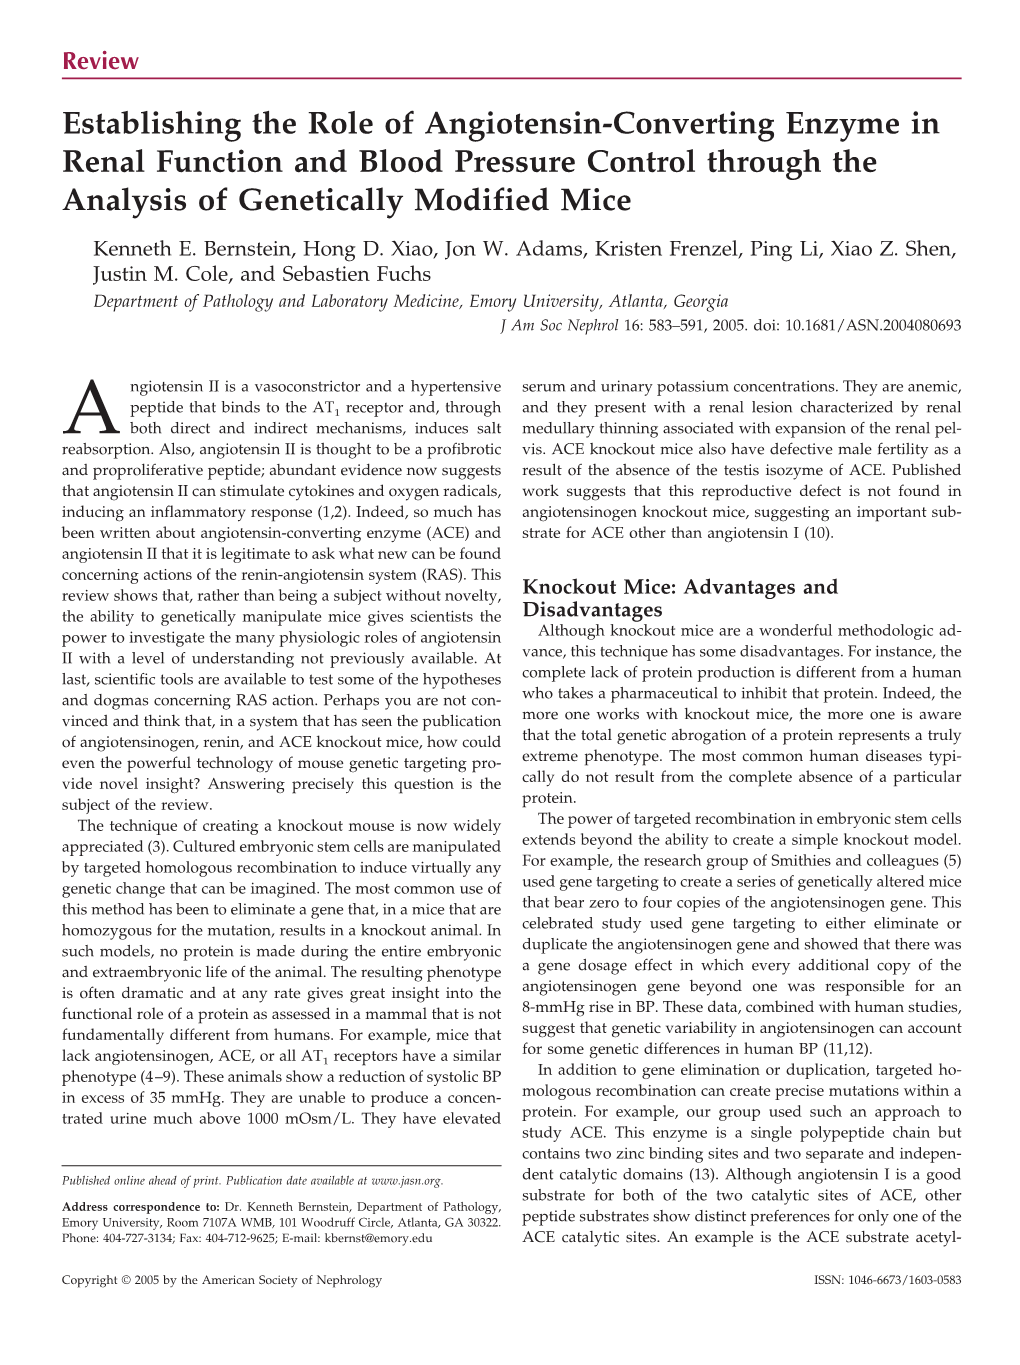 Establishing the Role of Angiotensin-Converting Enzyme in Renal Function and Blood Pressure Control Through the Analysis of Genetically Modified Mice